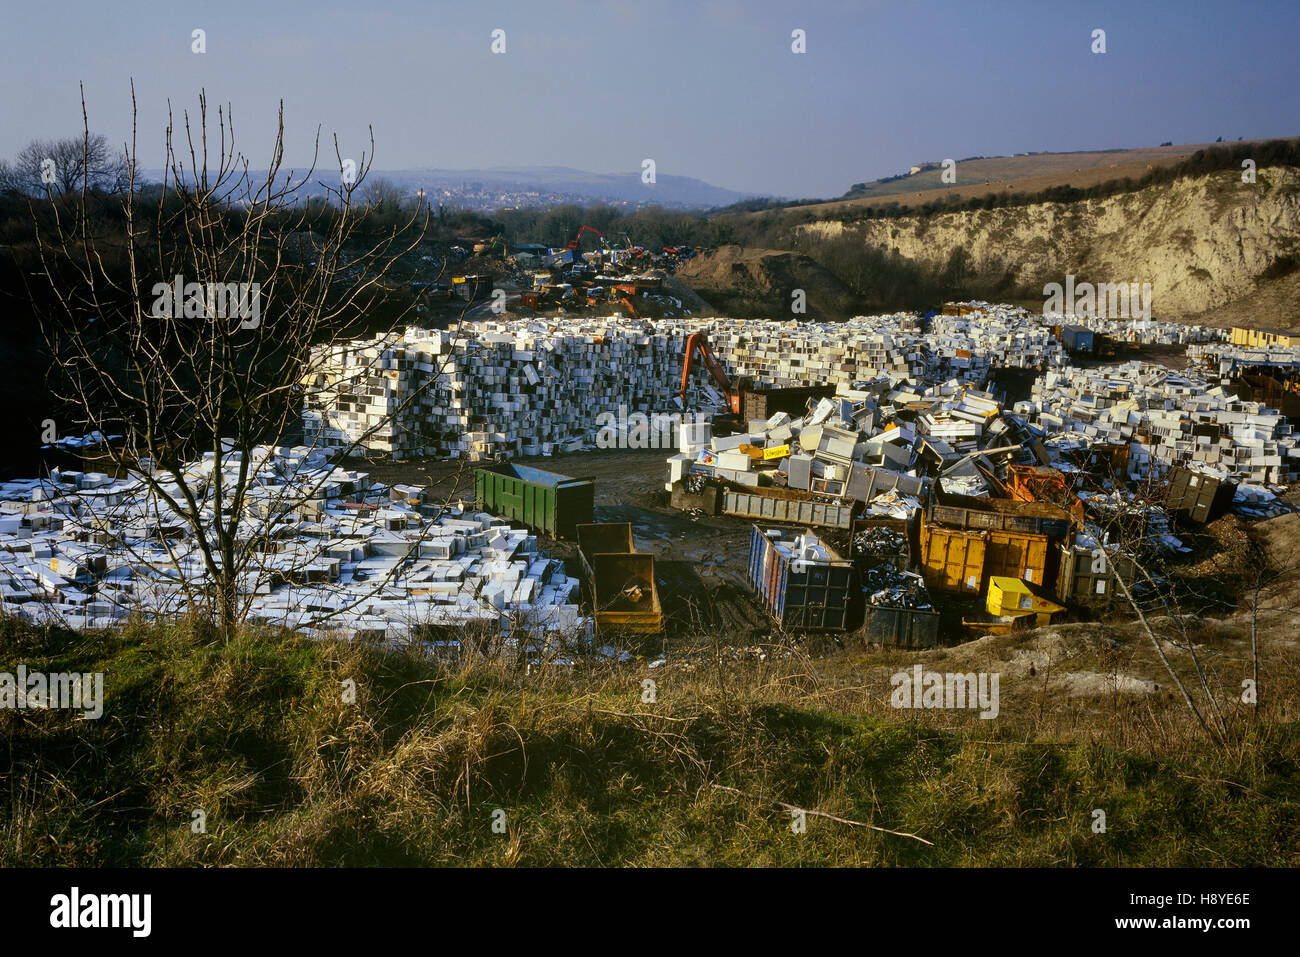 Old refrigerators, fridges await recycling at the temporary storage site of Greystone Quarry, Southerham Pit near Lewes, East Sussex, England UK. 2003 Stock Photo